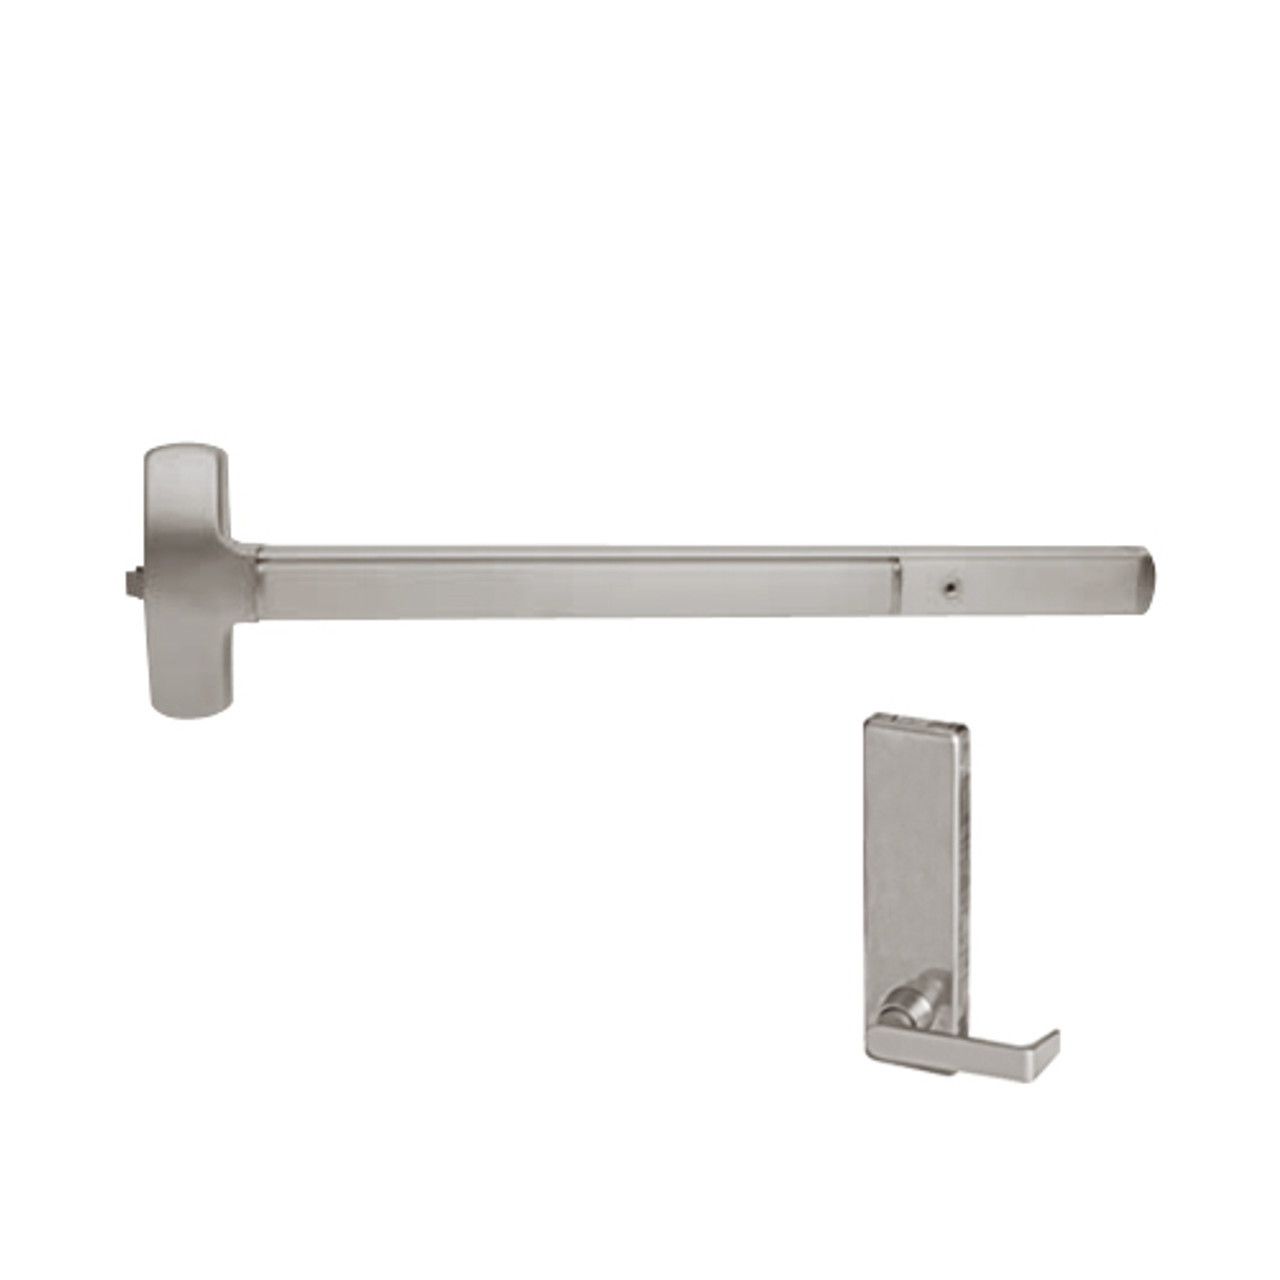 25-R-L-DT-DANE-US32D-4-RHR Falcon Exit Device in Satin Stainless Steel